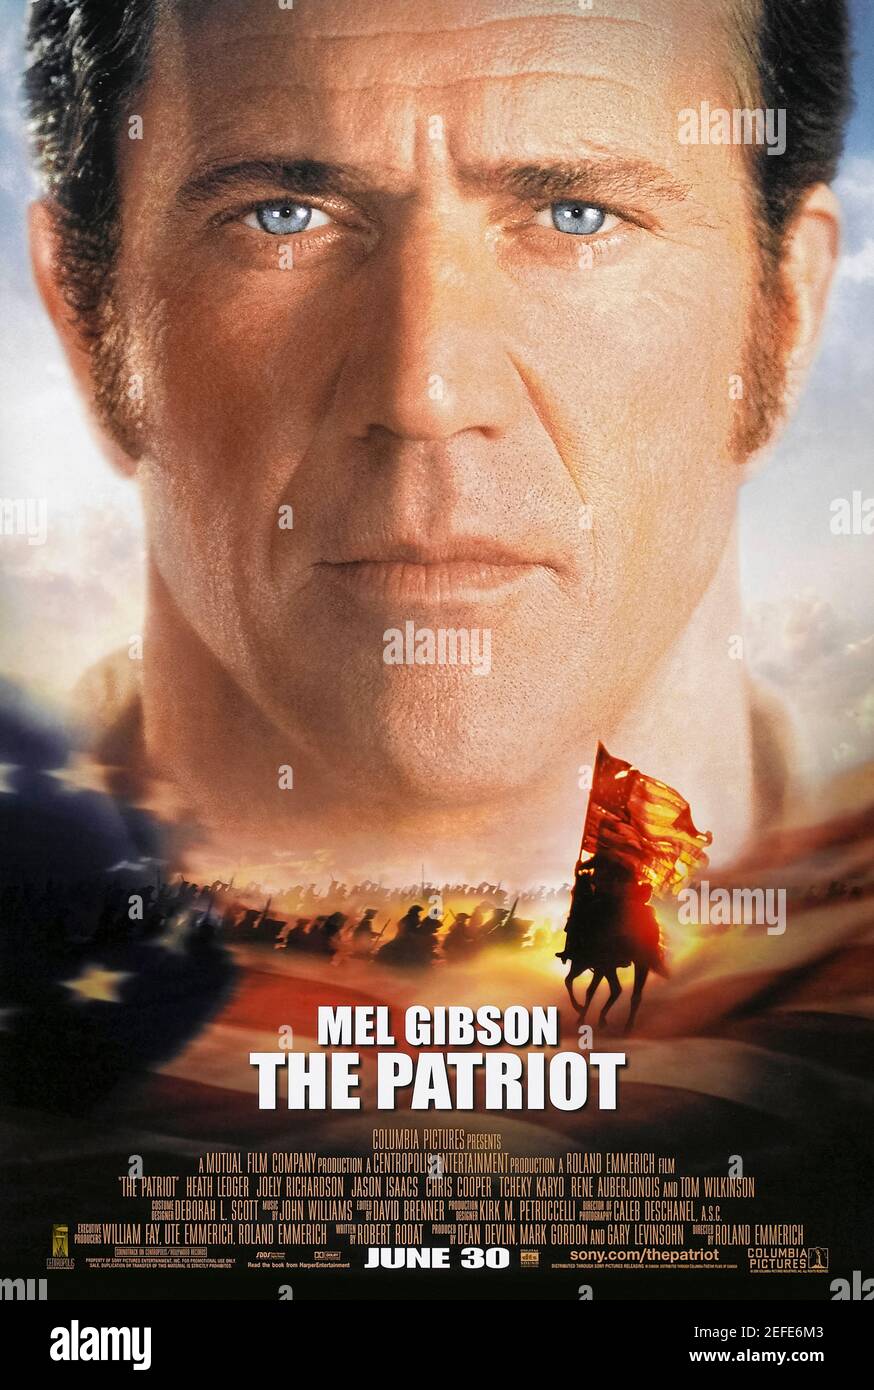 The Patriot (2000) directed by Roland Emmerich and starring Mel Gibson, Heath Ledger and Joely Richardson. A peaceful farmer is driven to lead the Colonial Militia during the American Revolution when a sadistic British officer murders his son. Stock Photo